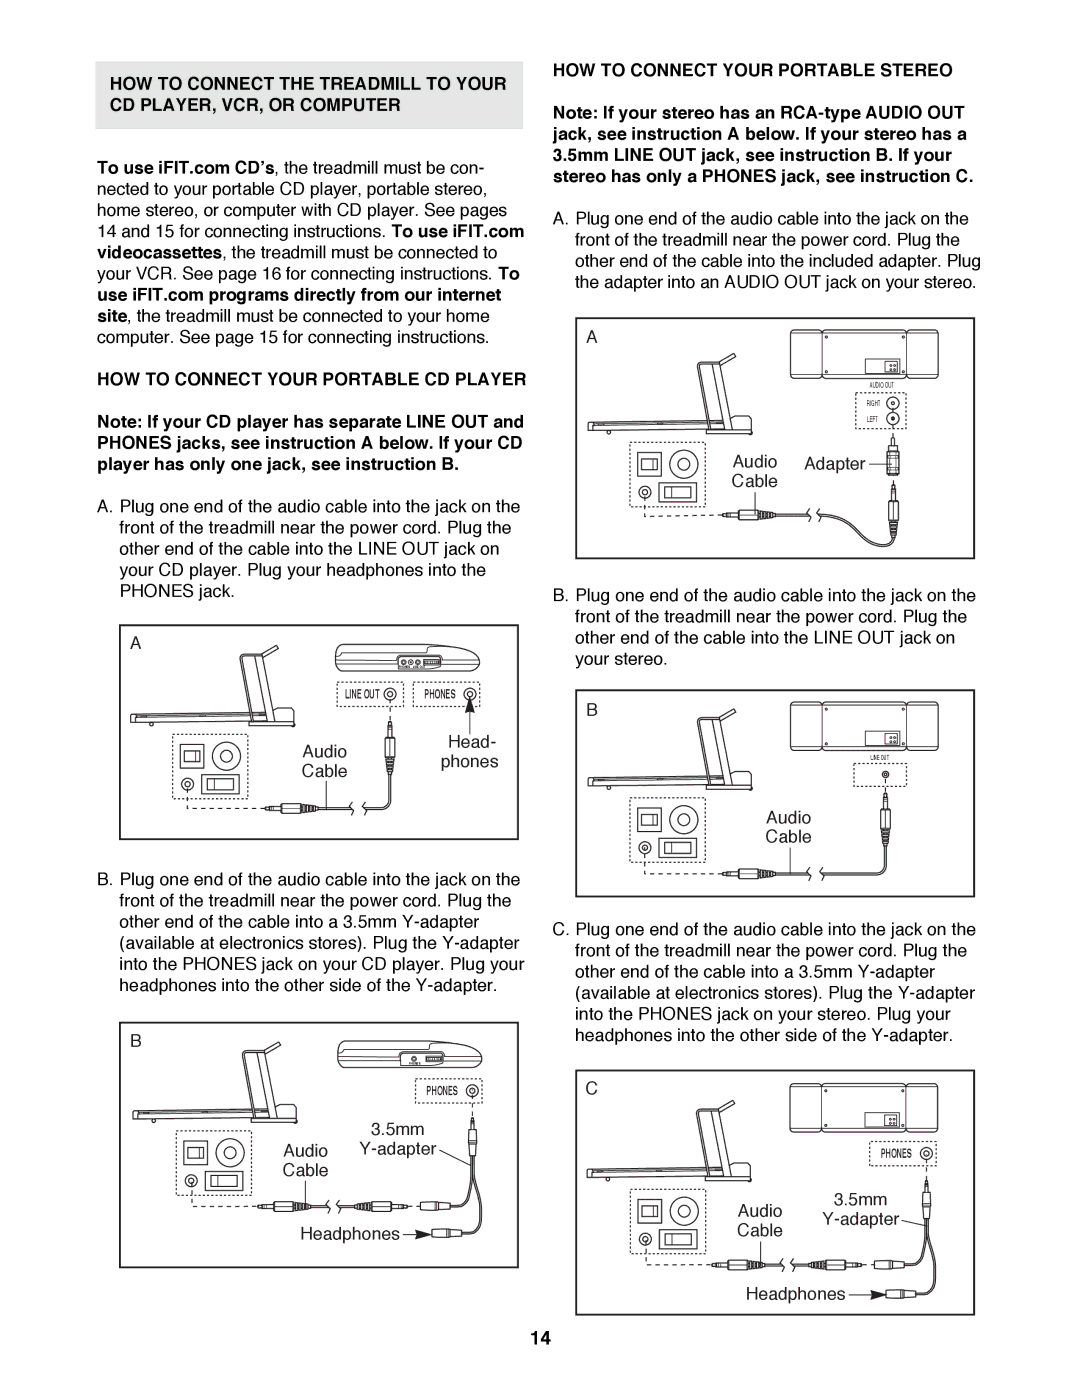 ProForm 831.299481 user manual HOW to Connect Your Portable Stereo 